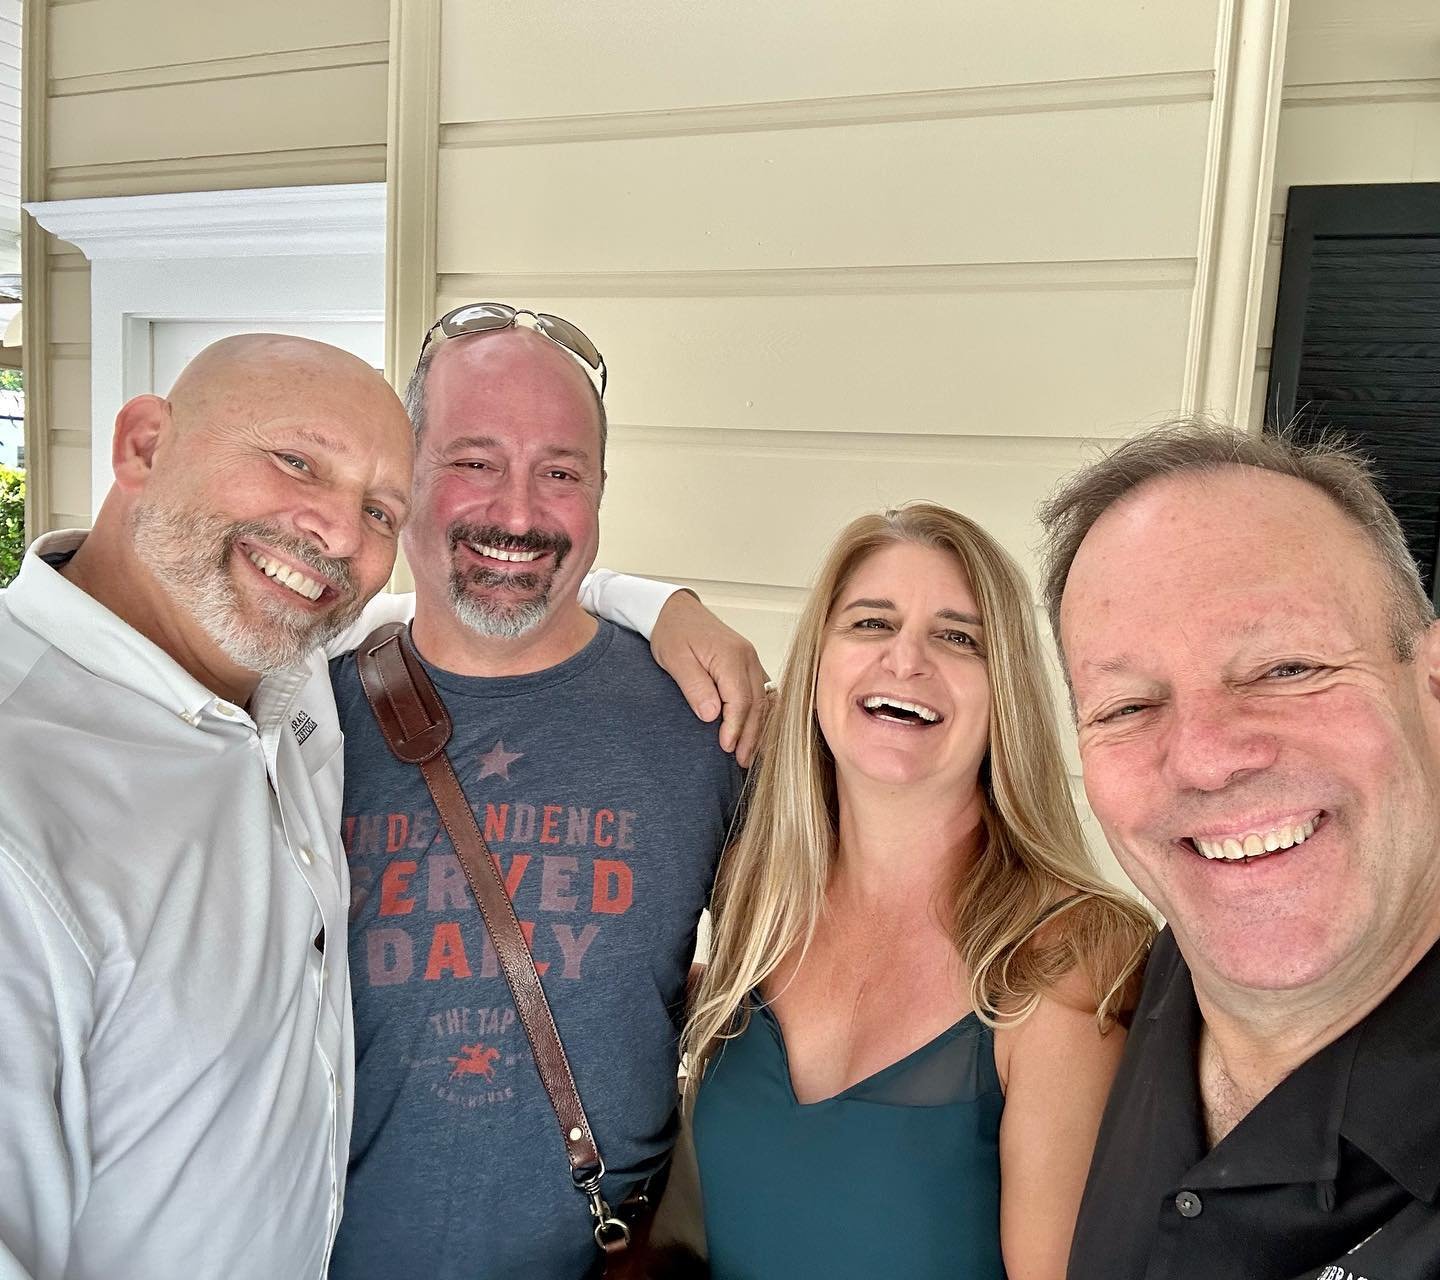 Friends Friday!  Rachel &amp; Paul have officially joined the family of friends!  So much fun! #friendsfriday #chosenfamily #embracewhatisgood #bedandbreakfast #napavalley #winecountry #thisiscalistoga #visitcalistoga